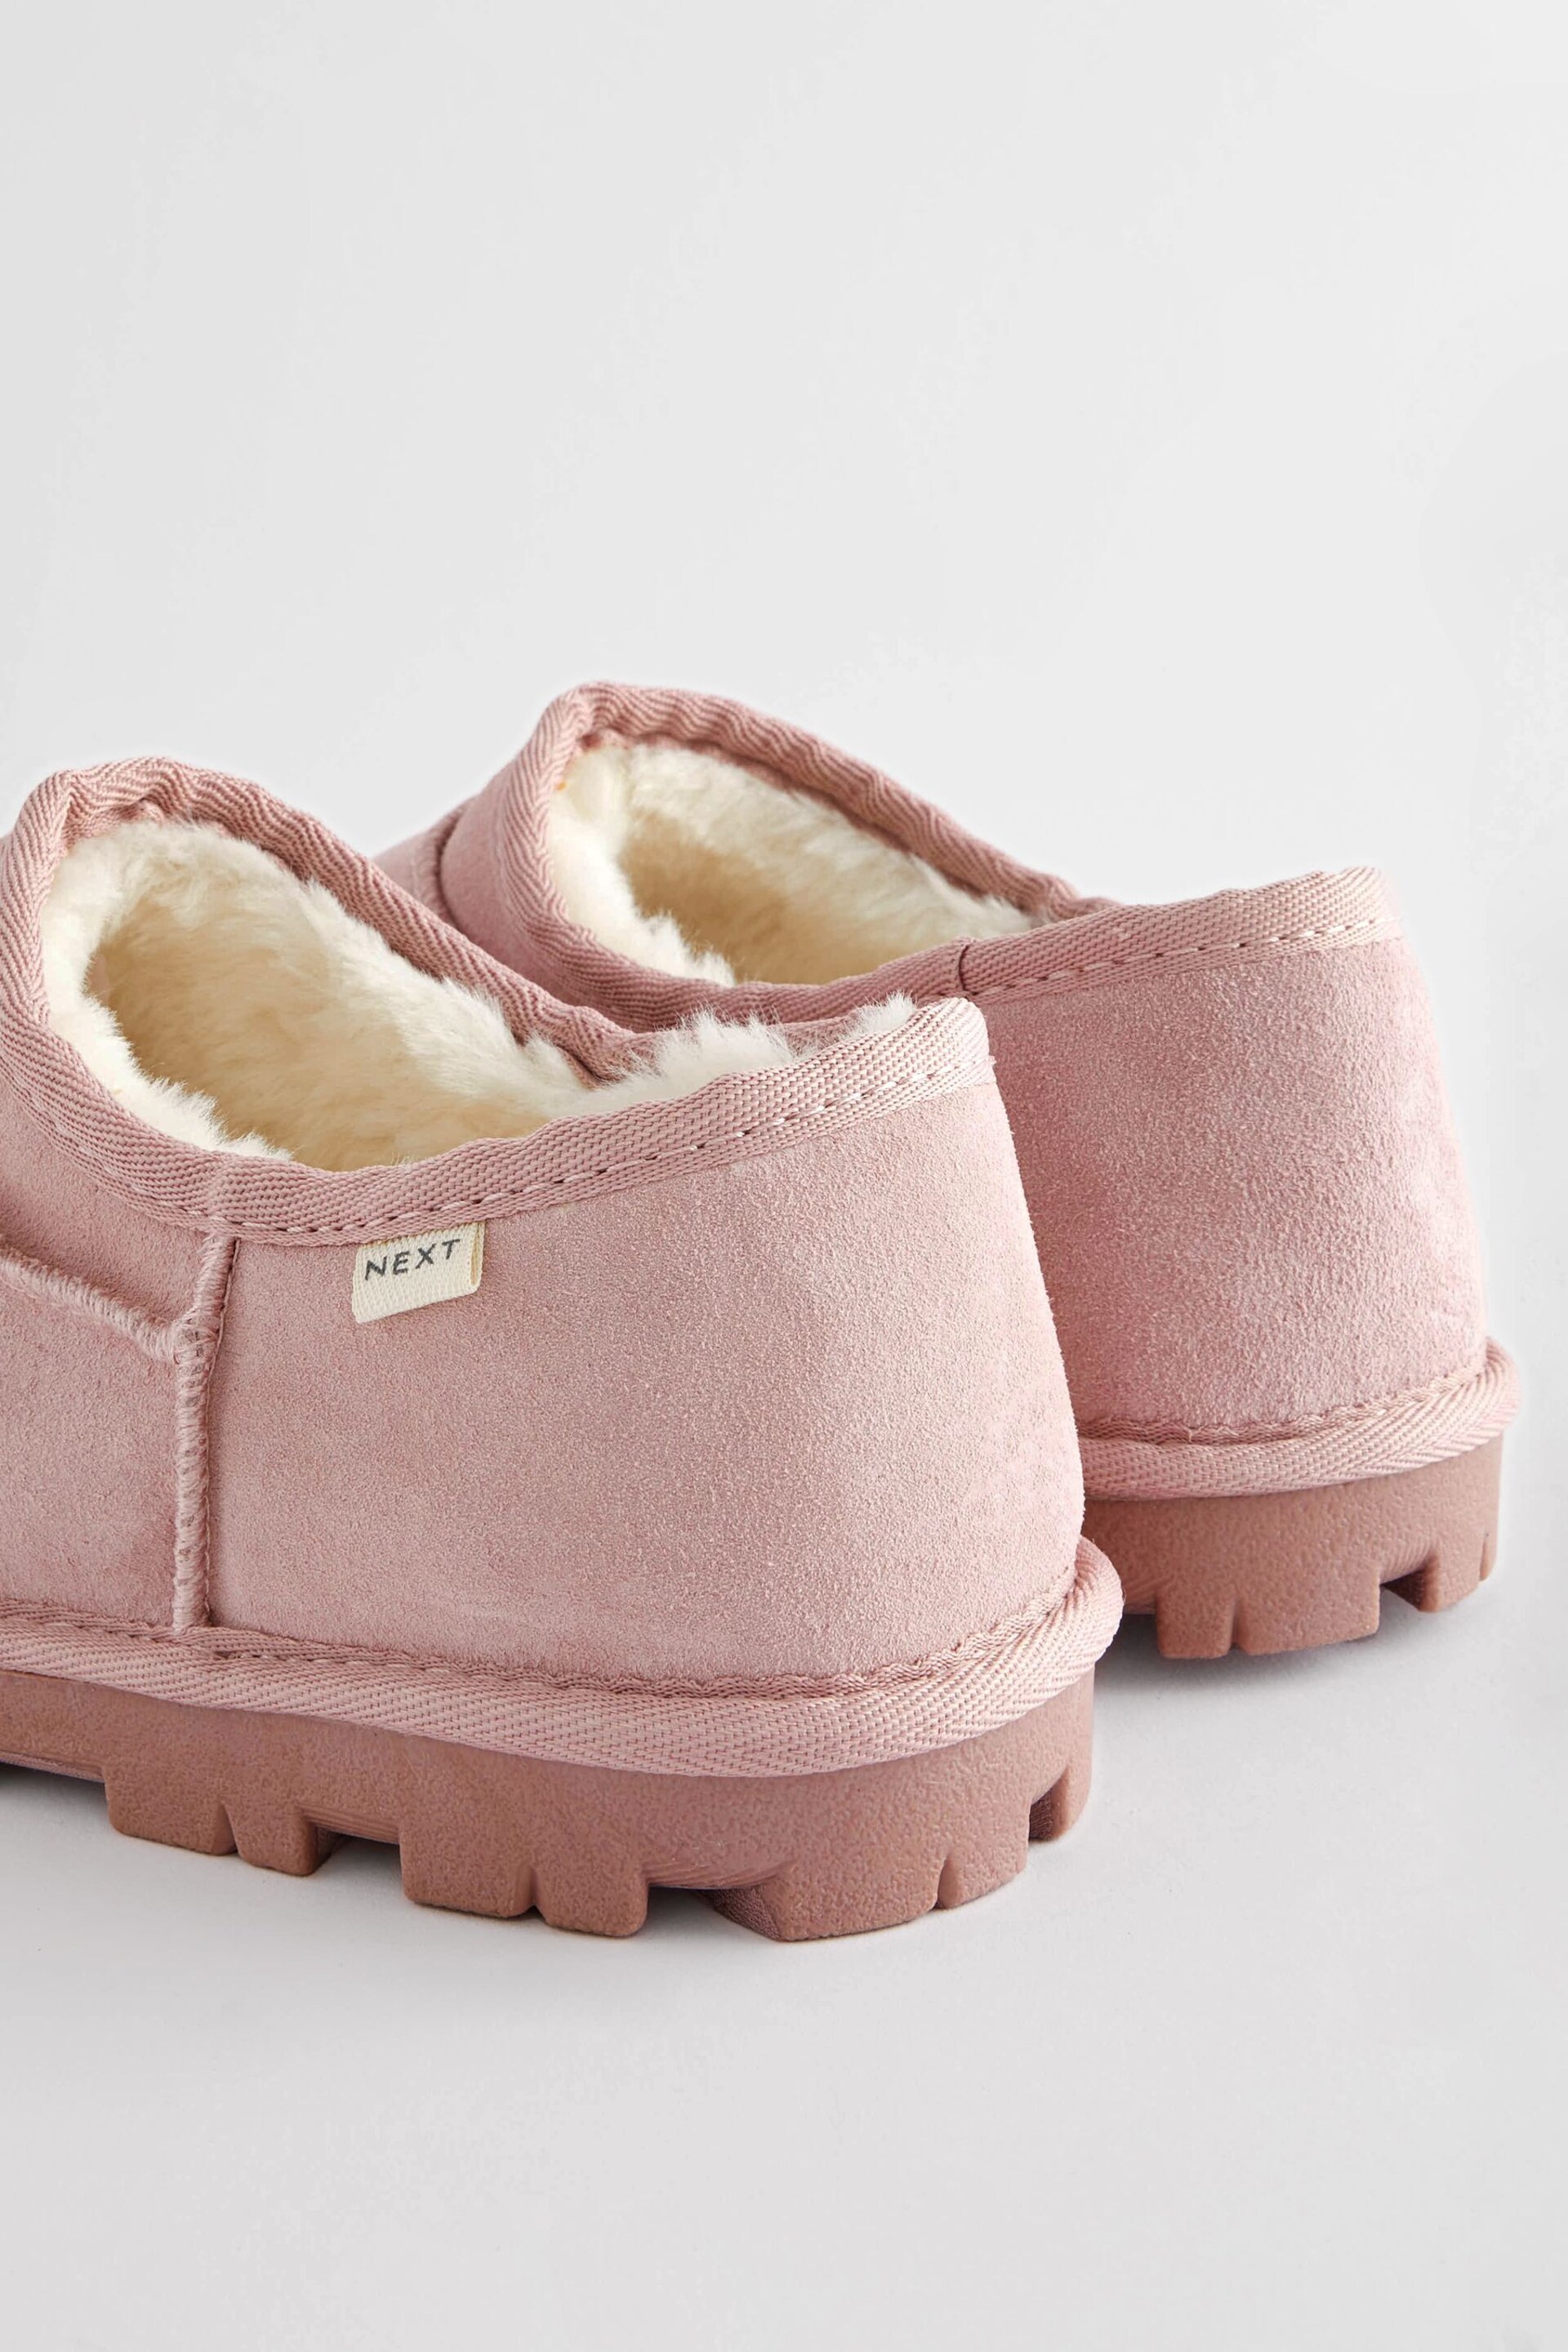 Pink Suede Shoot Slippers - Image 5 of 8